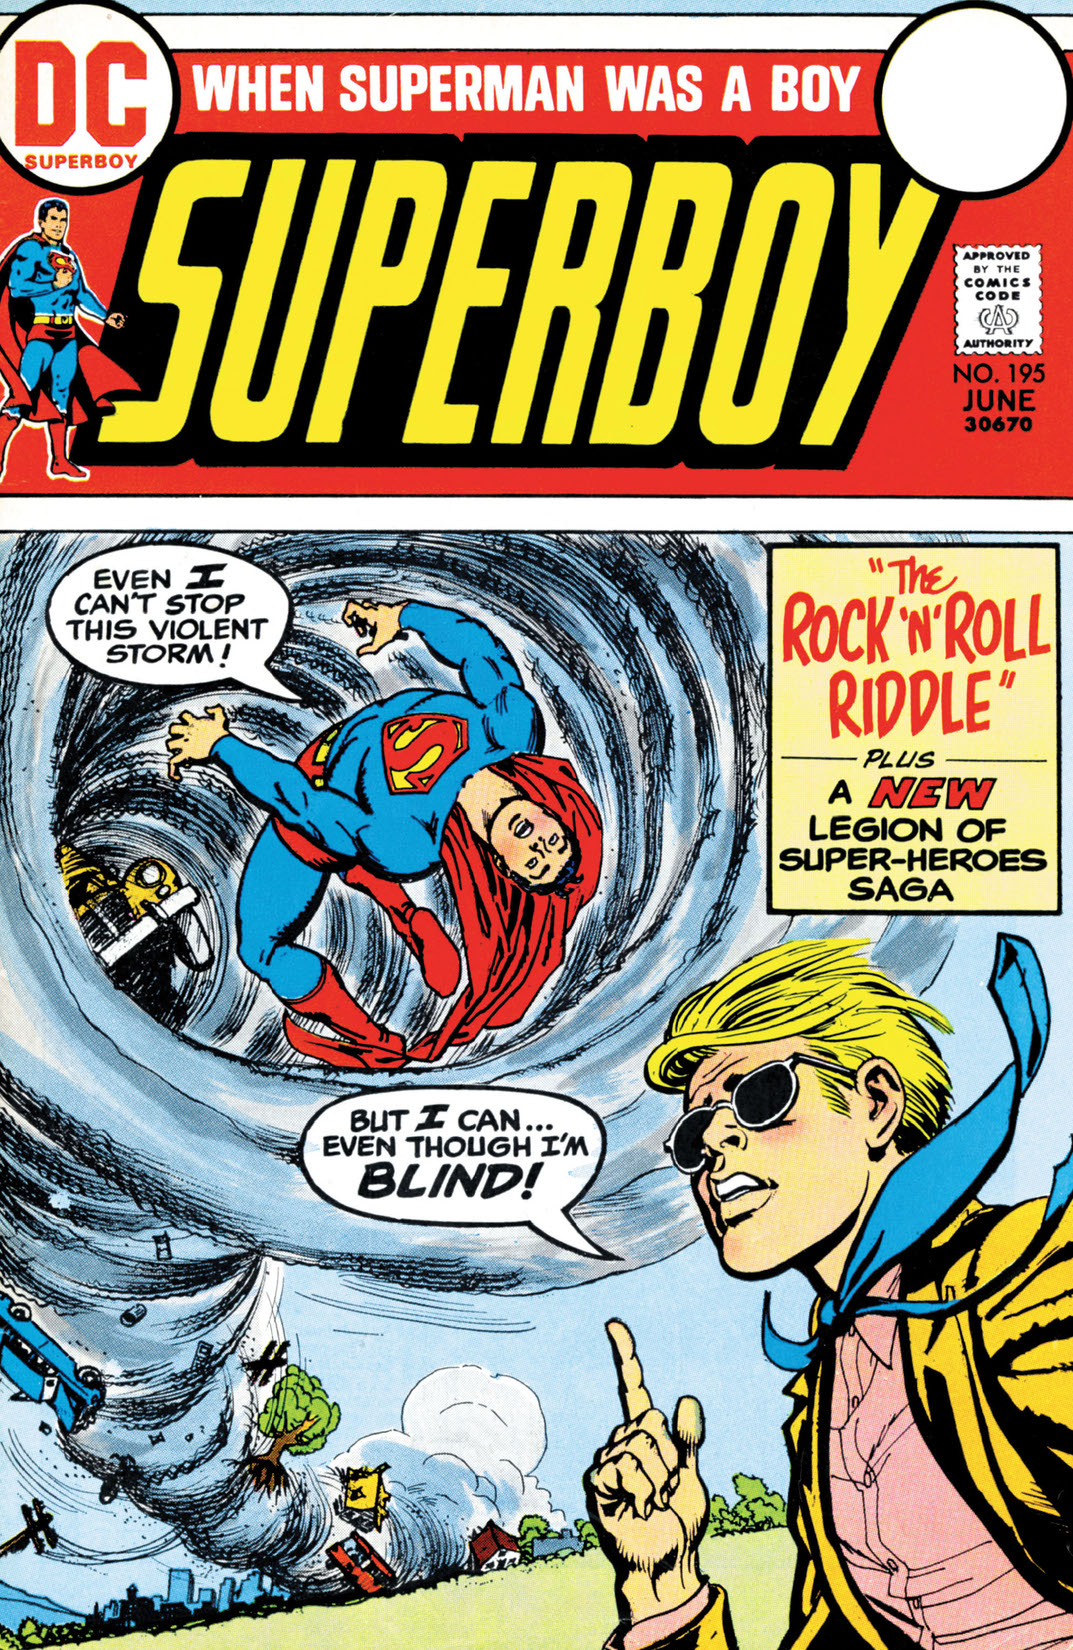 Superboy (1949-) #195 preview images